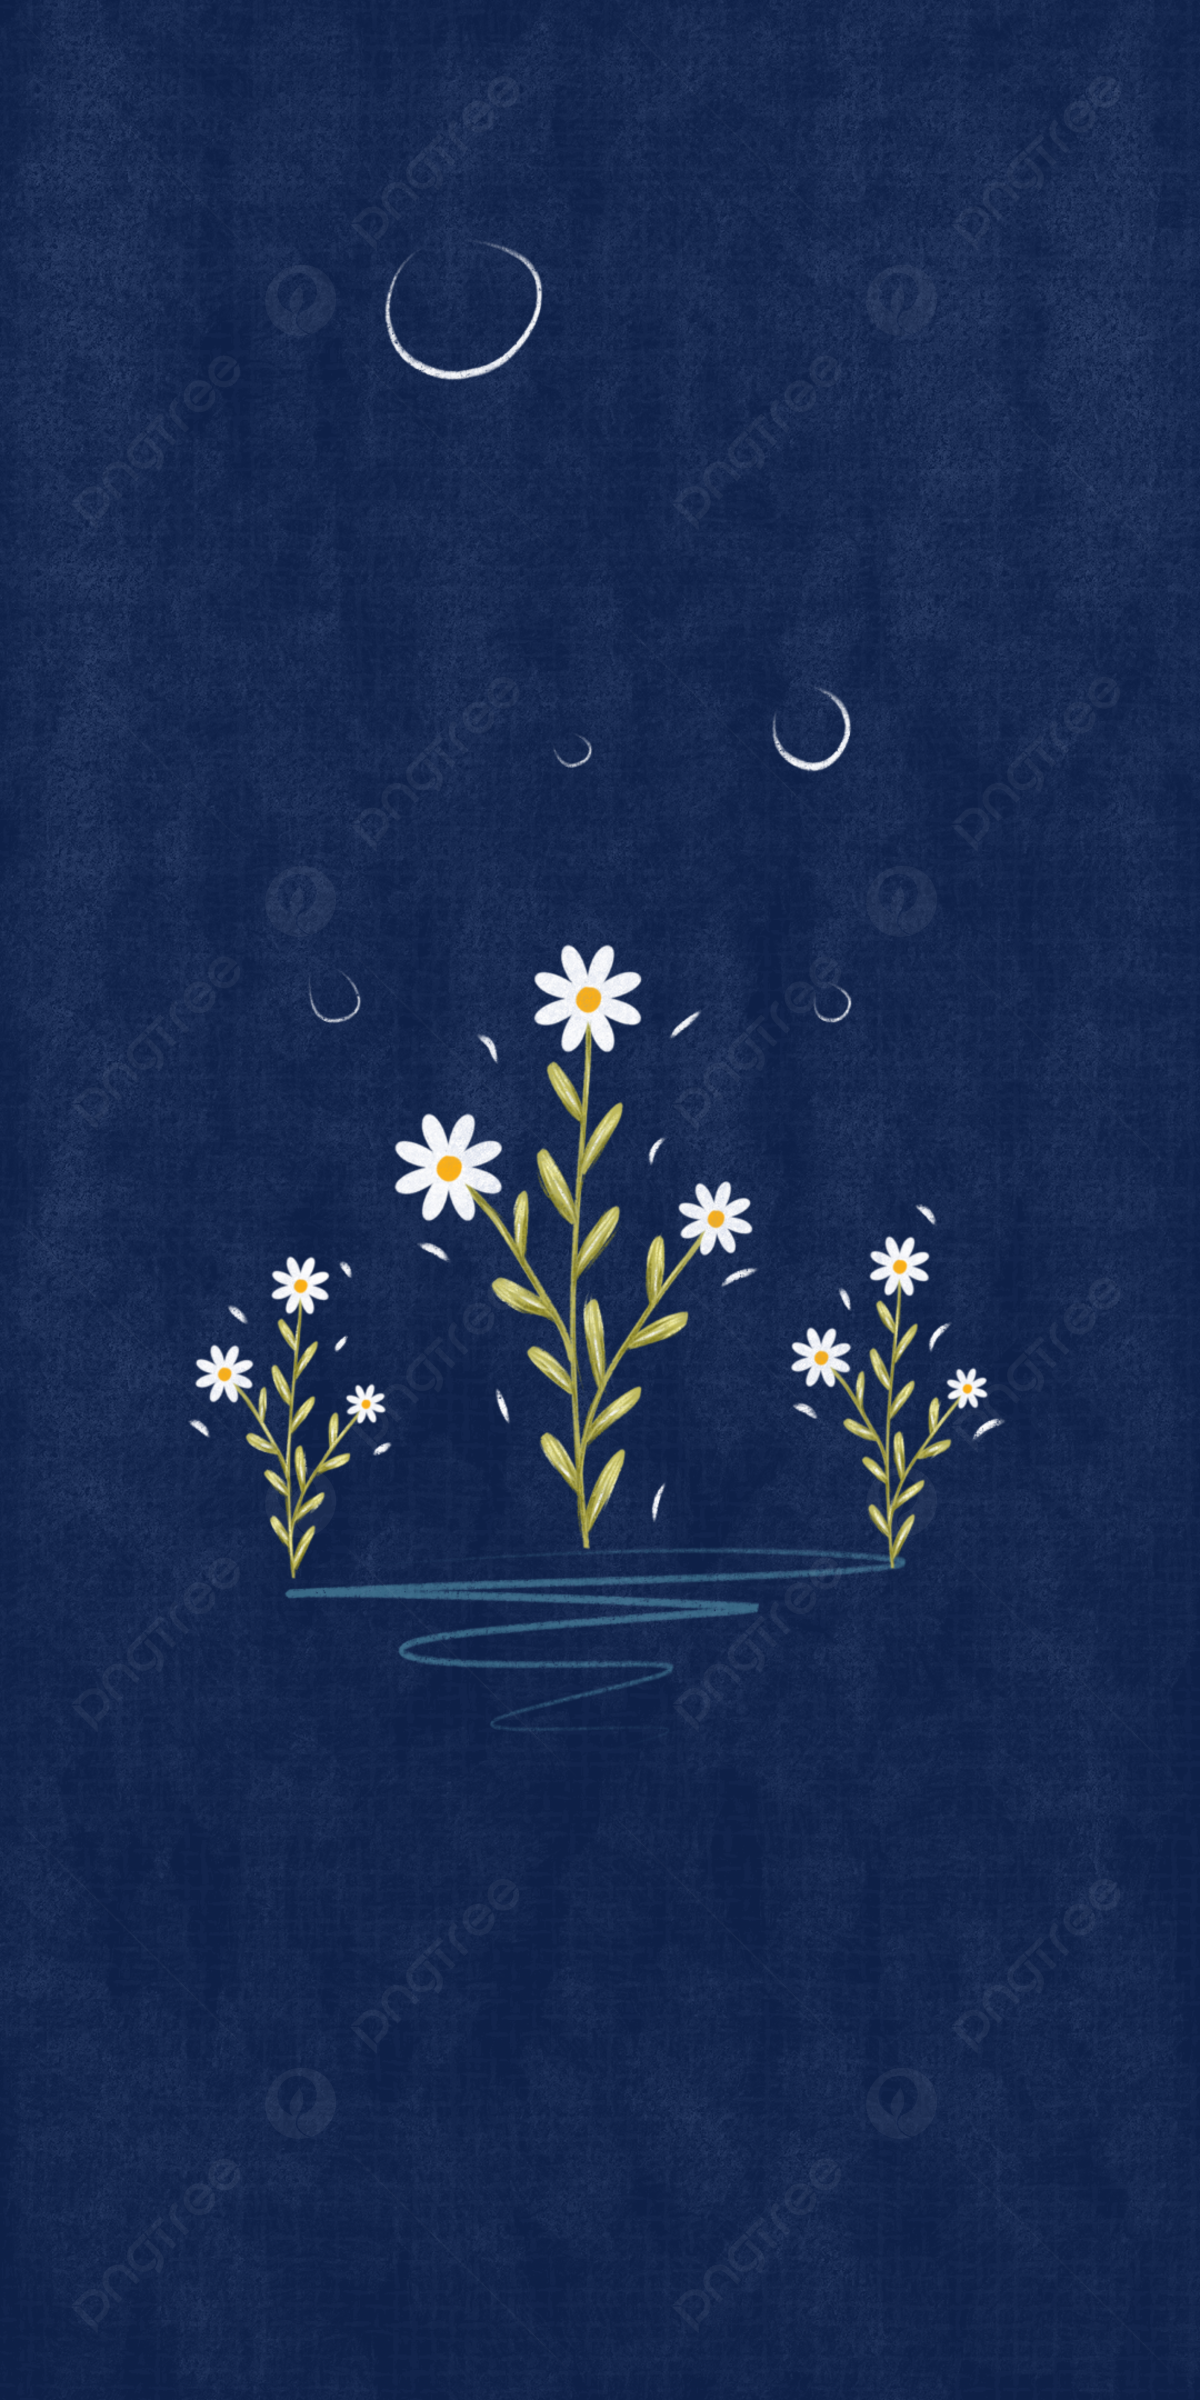 Hand draw lockscreen wallpaper daisy flowers background wallpaper background lockscreen background image for free download